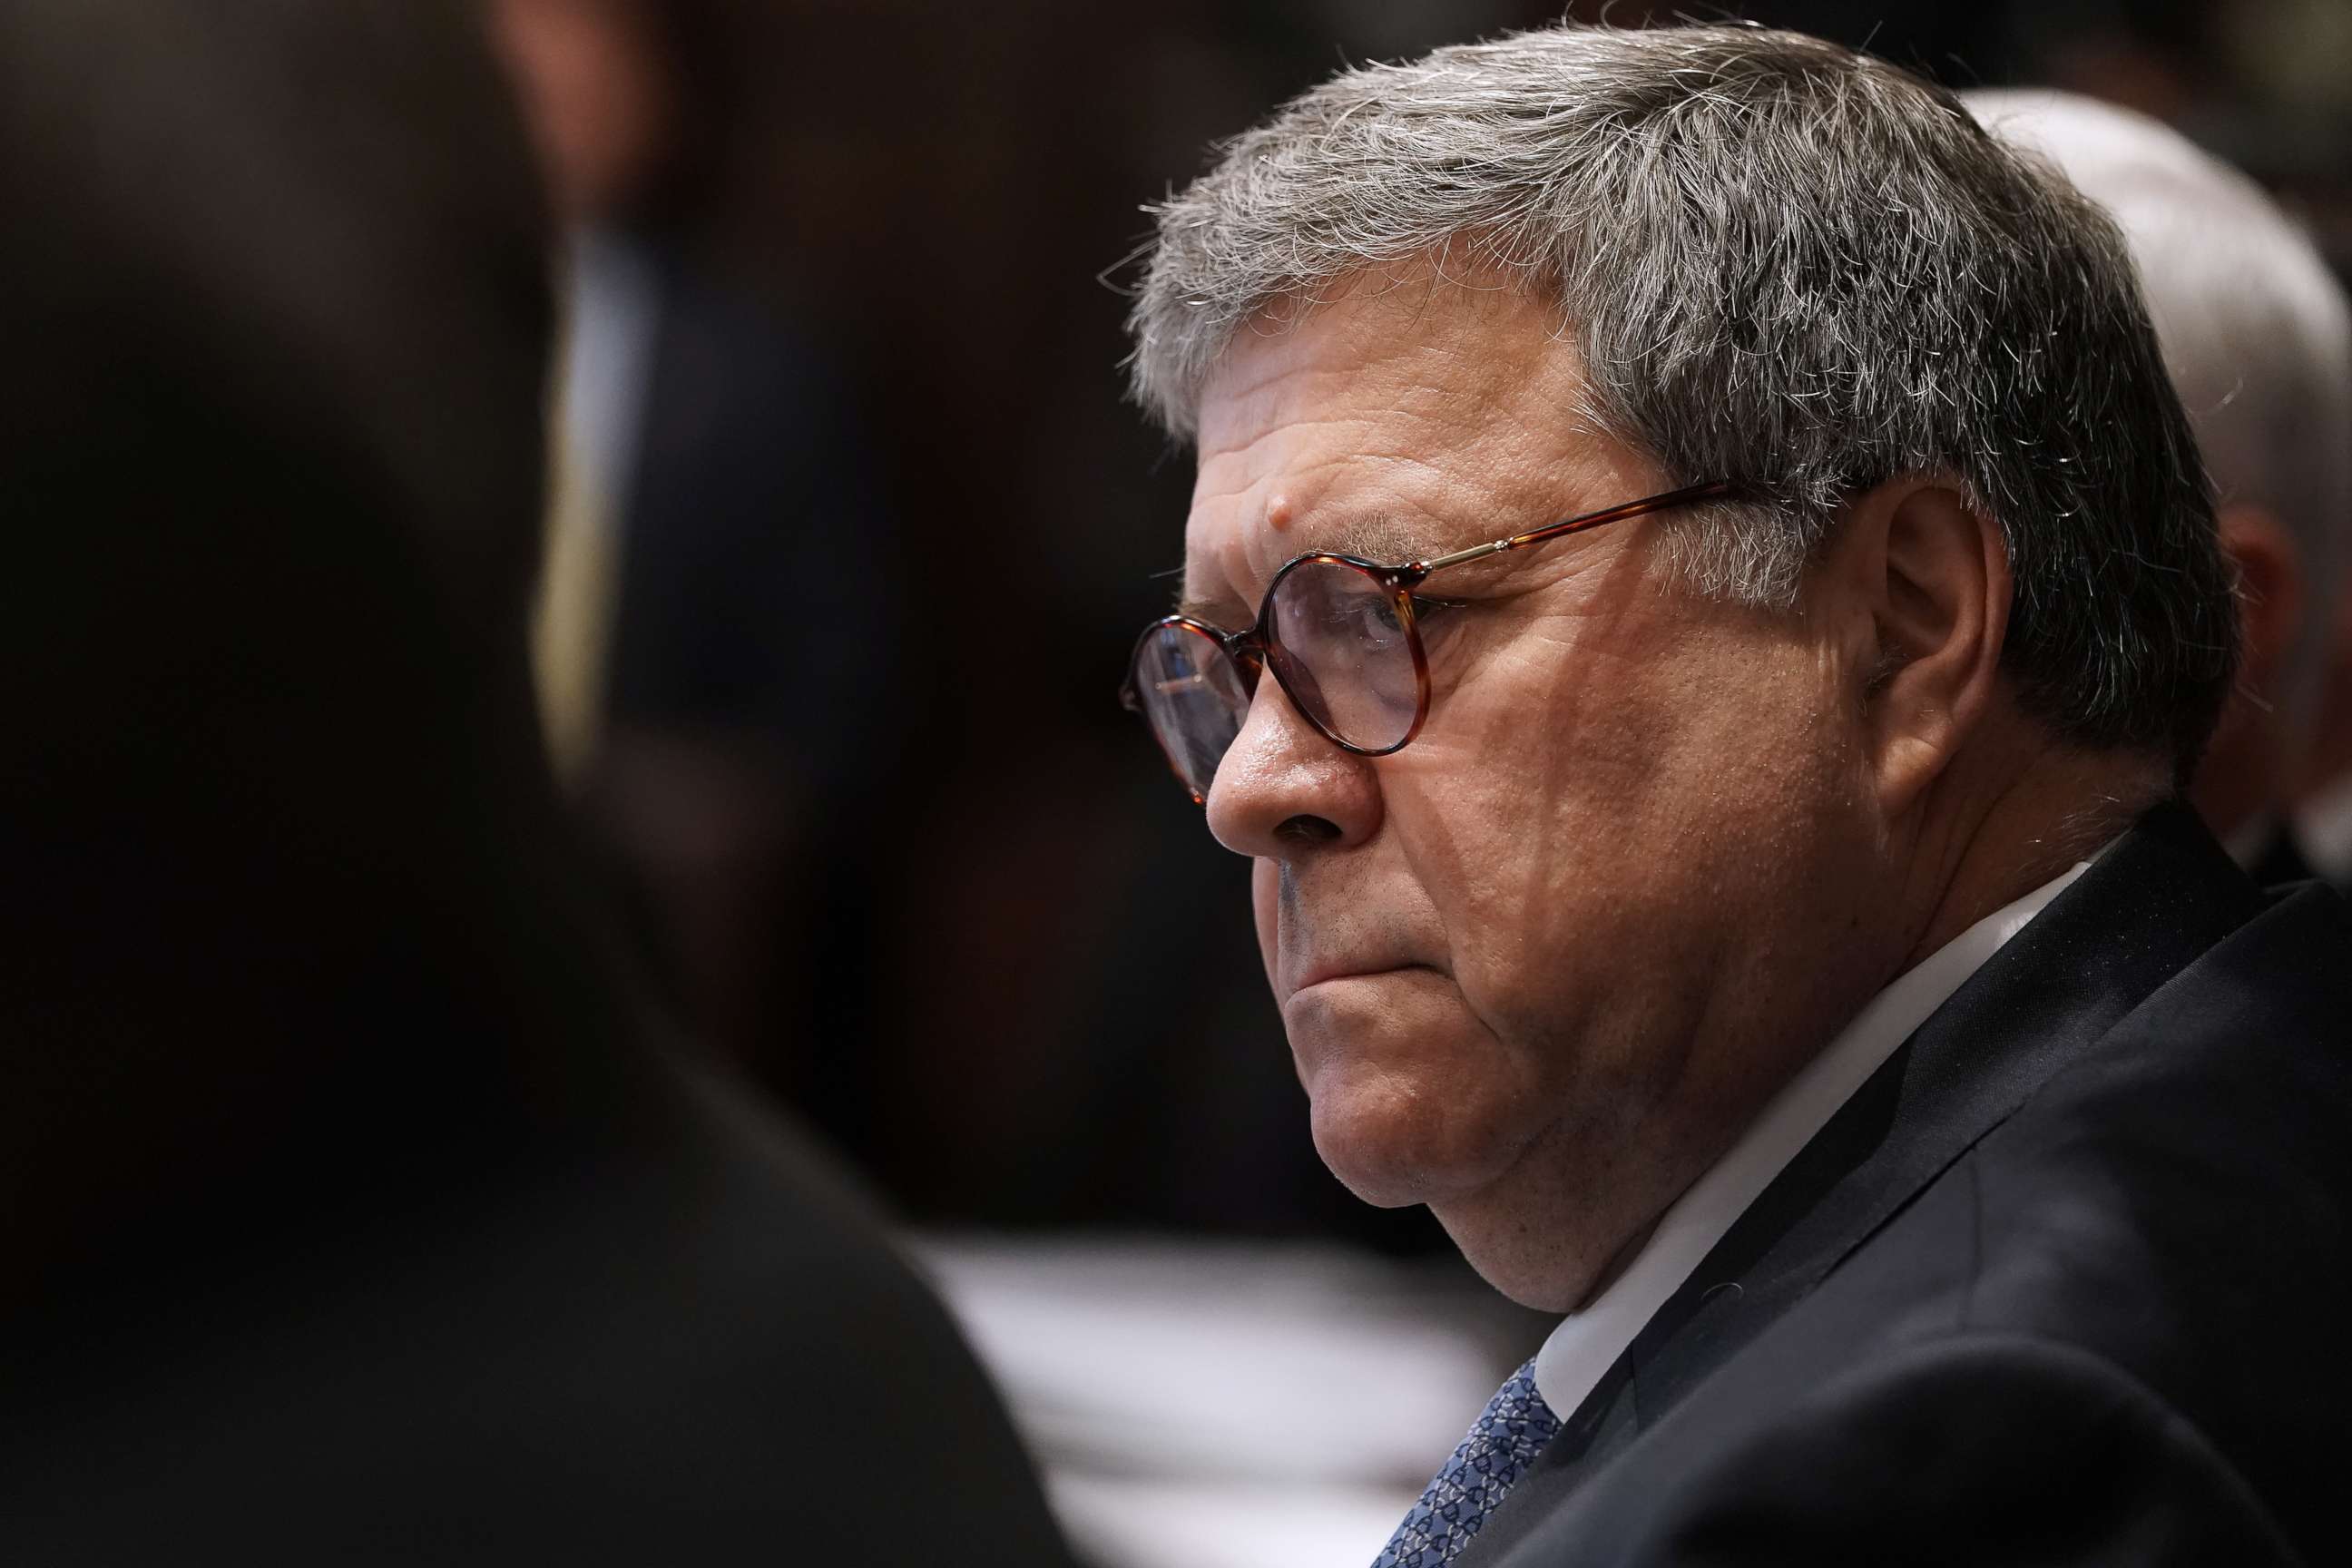 PHOTO: Attorney General William Barr attends a cabinet meeting at the White House July 16, 2019 in Washington, DC.